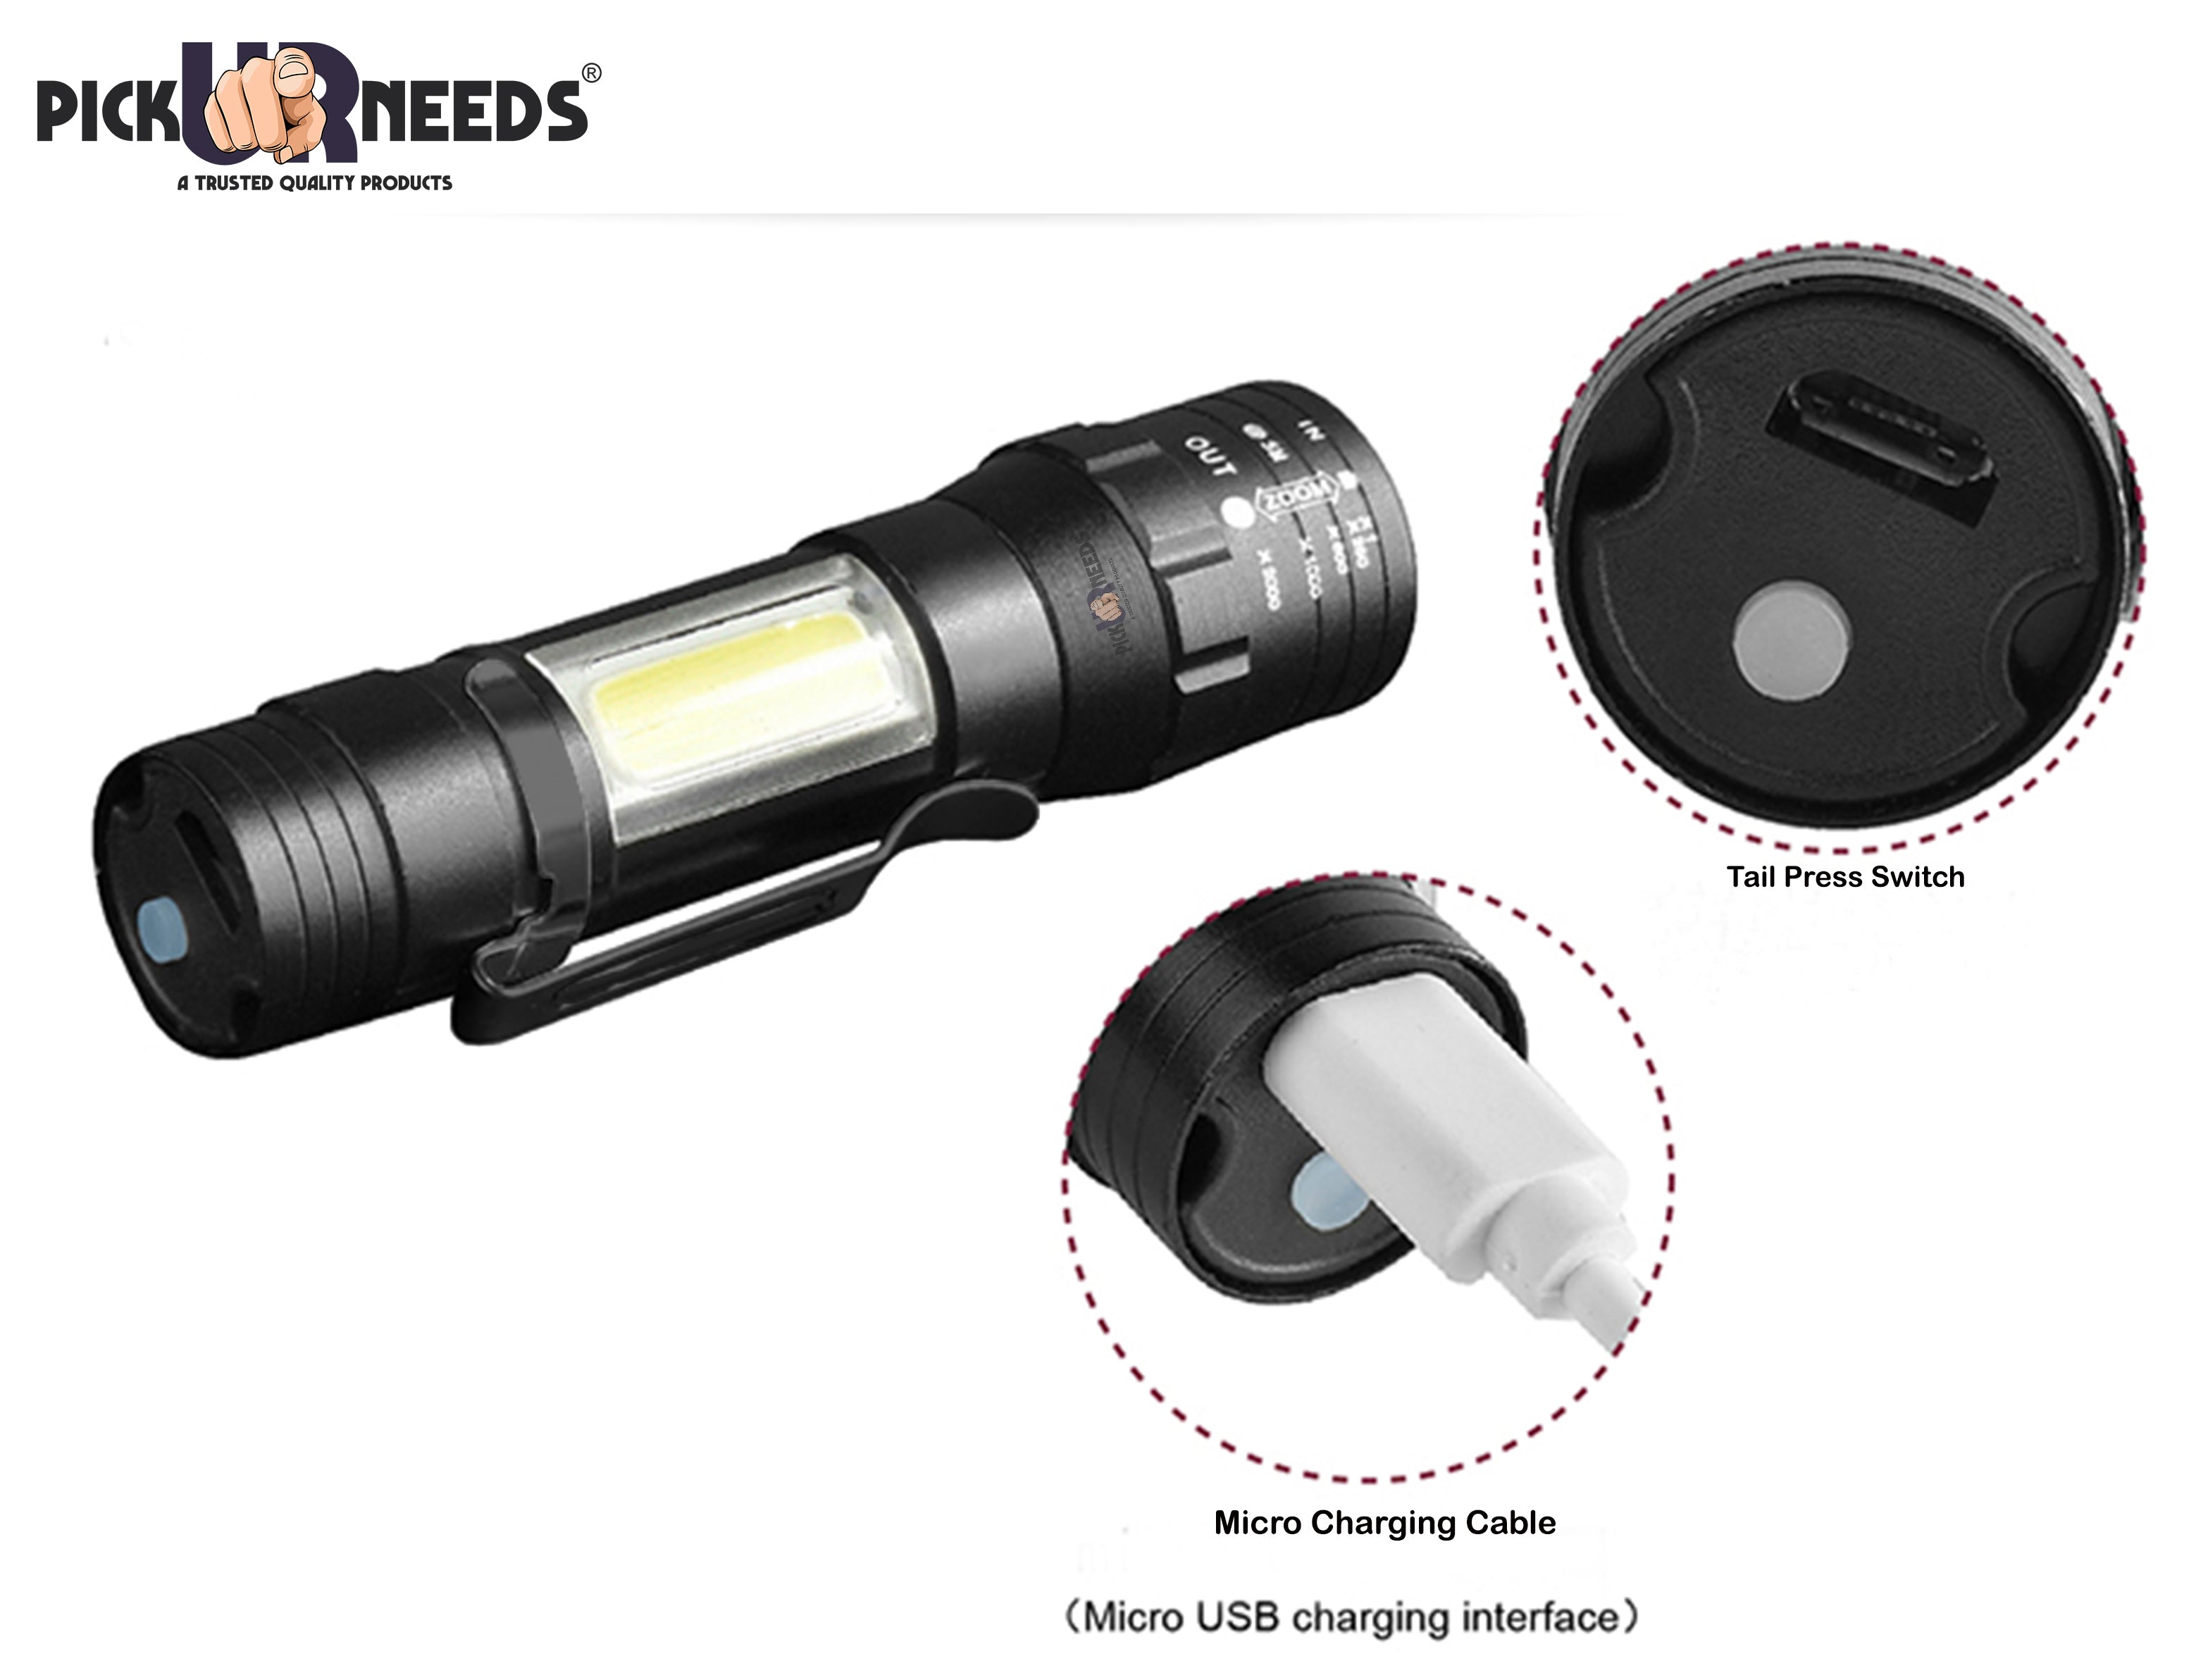 Mini torches LED Zoomable Led Torches avec 3 modes rechargeable